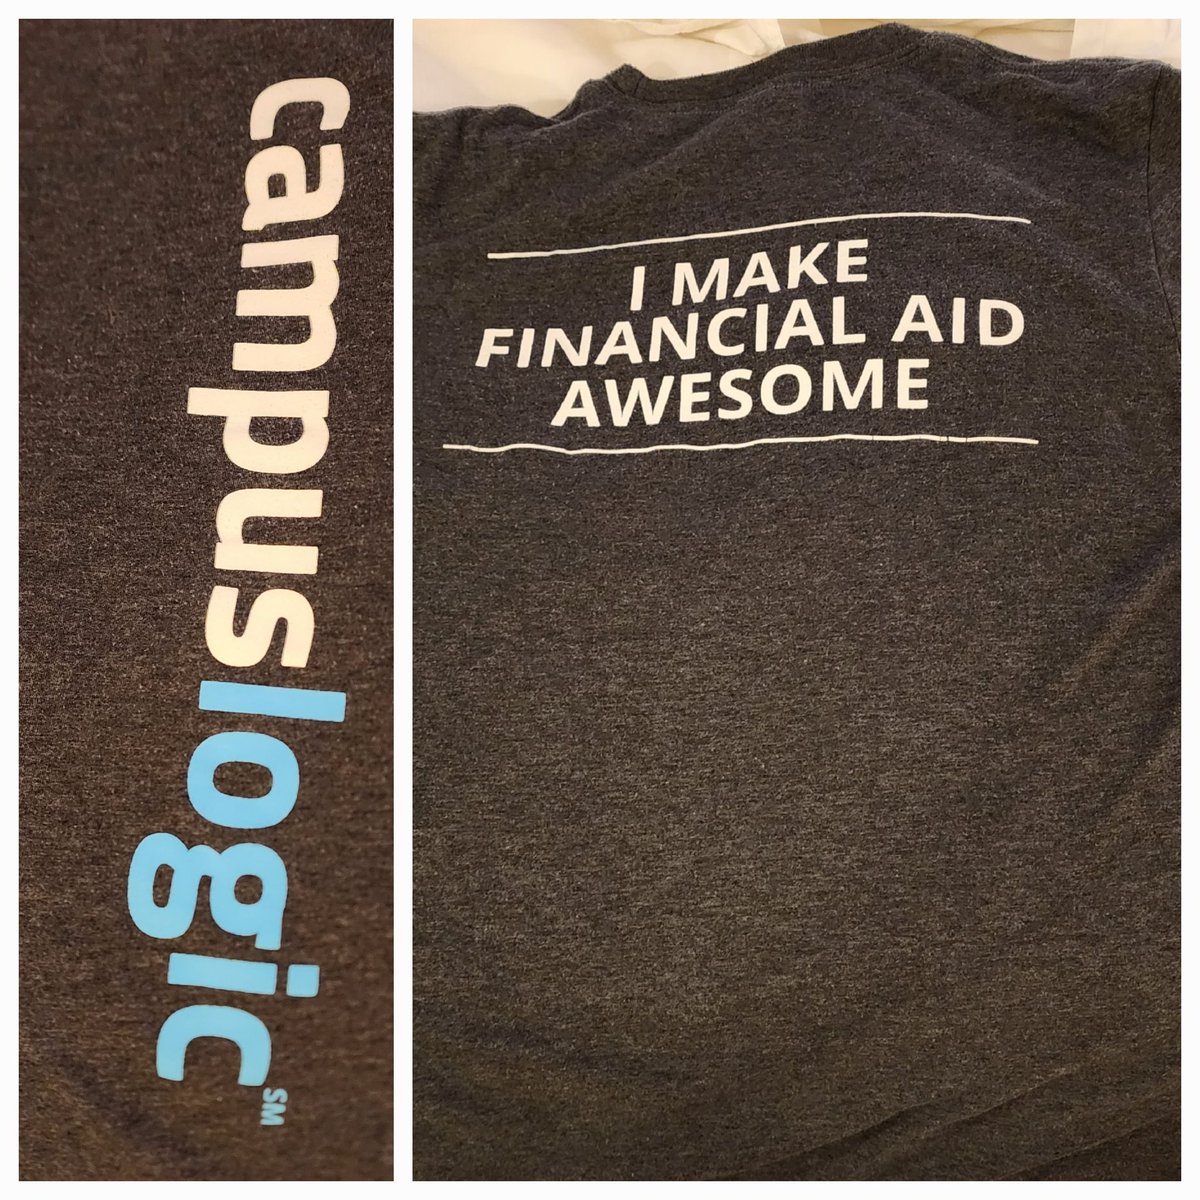 Packing my bag as #nasfaa2023 ends and realized this was my PJ top last night. 

Of all years, the community could have used some swag like this - it is this one.

I miss the message we used to share with FA professionals and the CampusLogic alumi who delivered it.